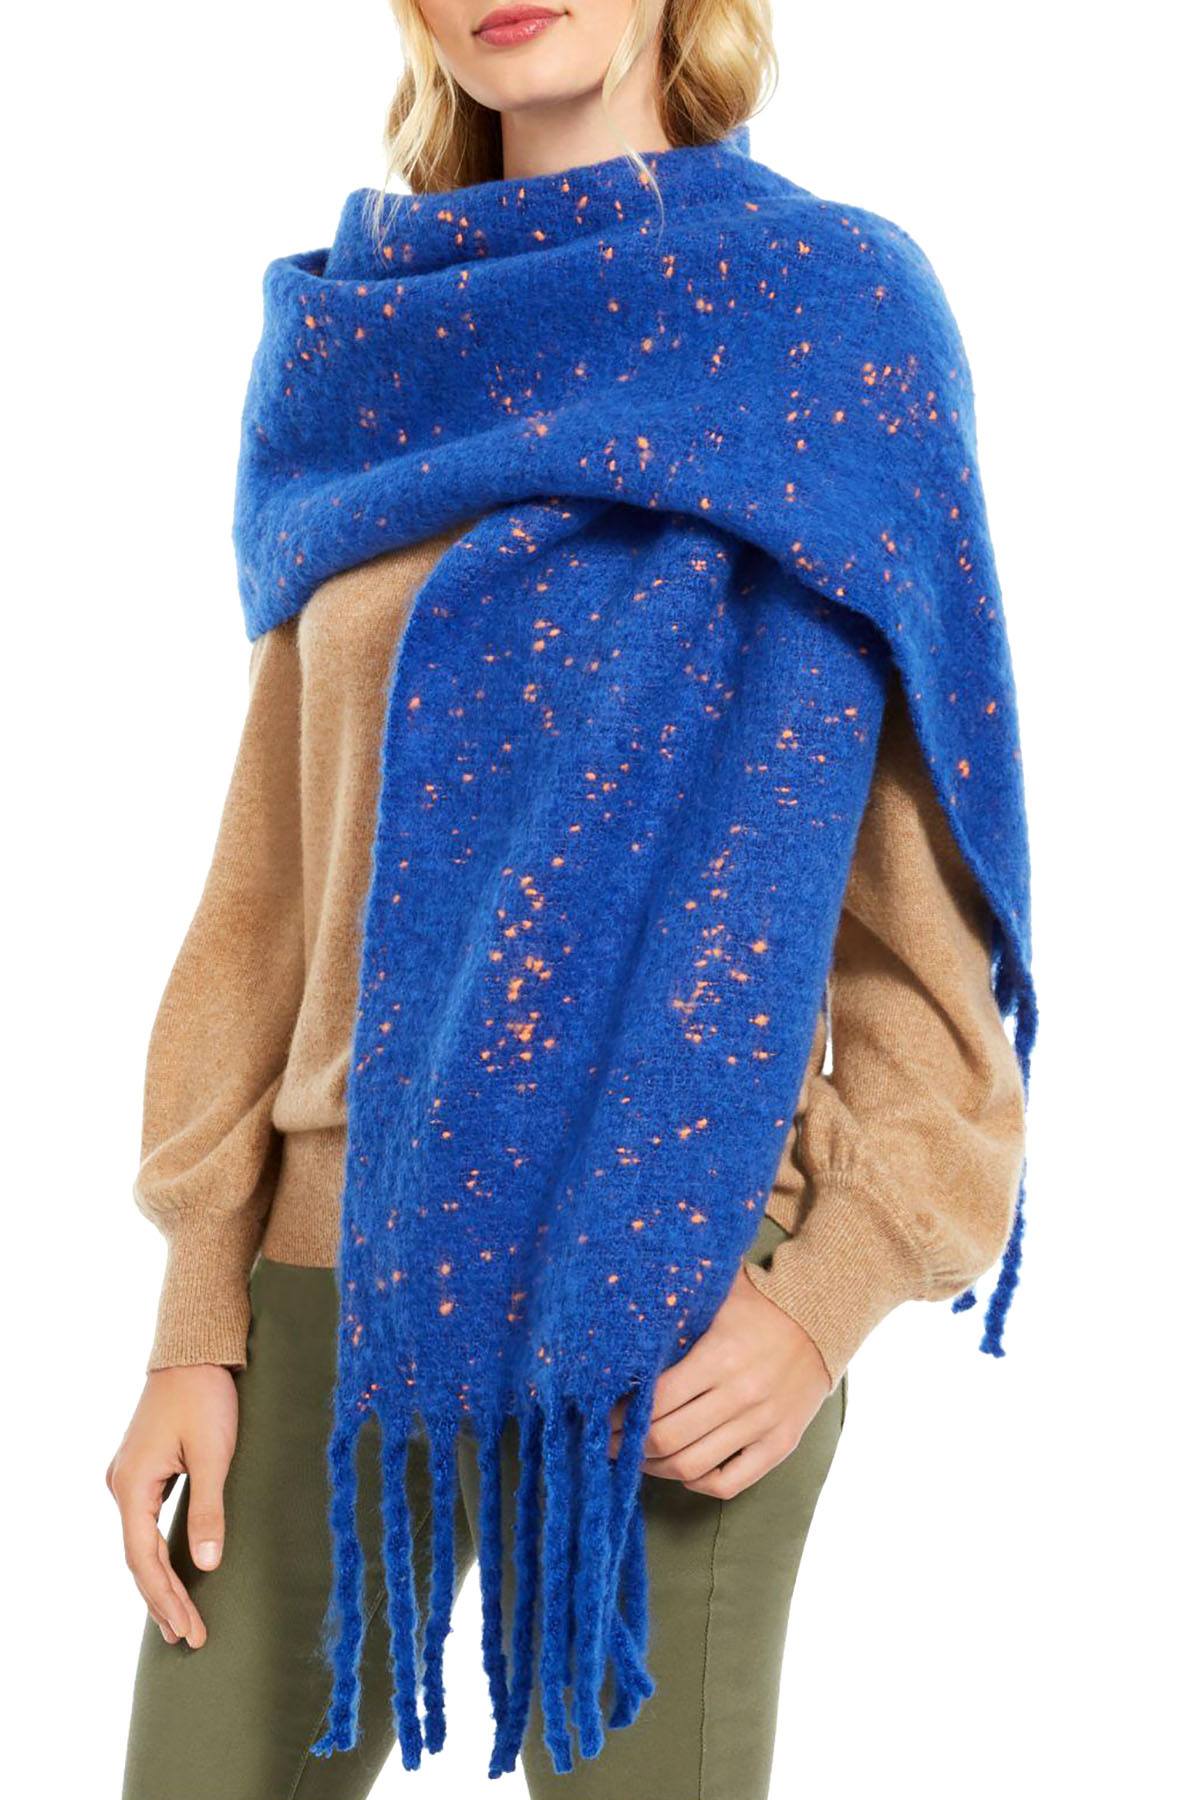 DKNY Blue Pop Neon Speckled Scarf